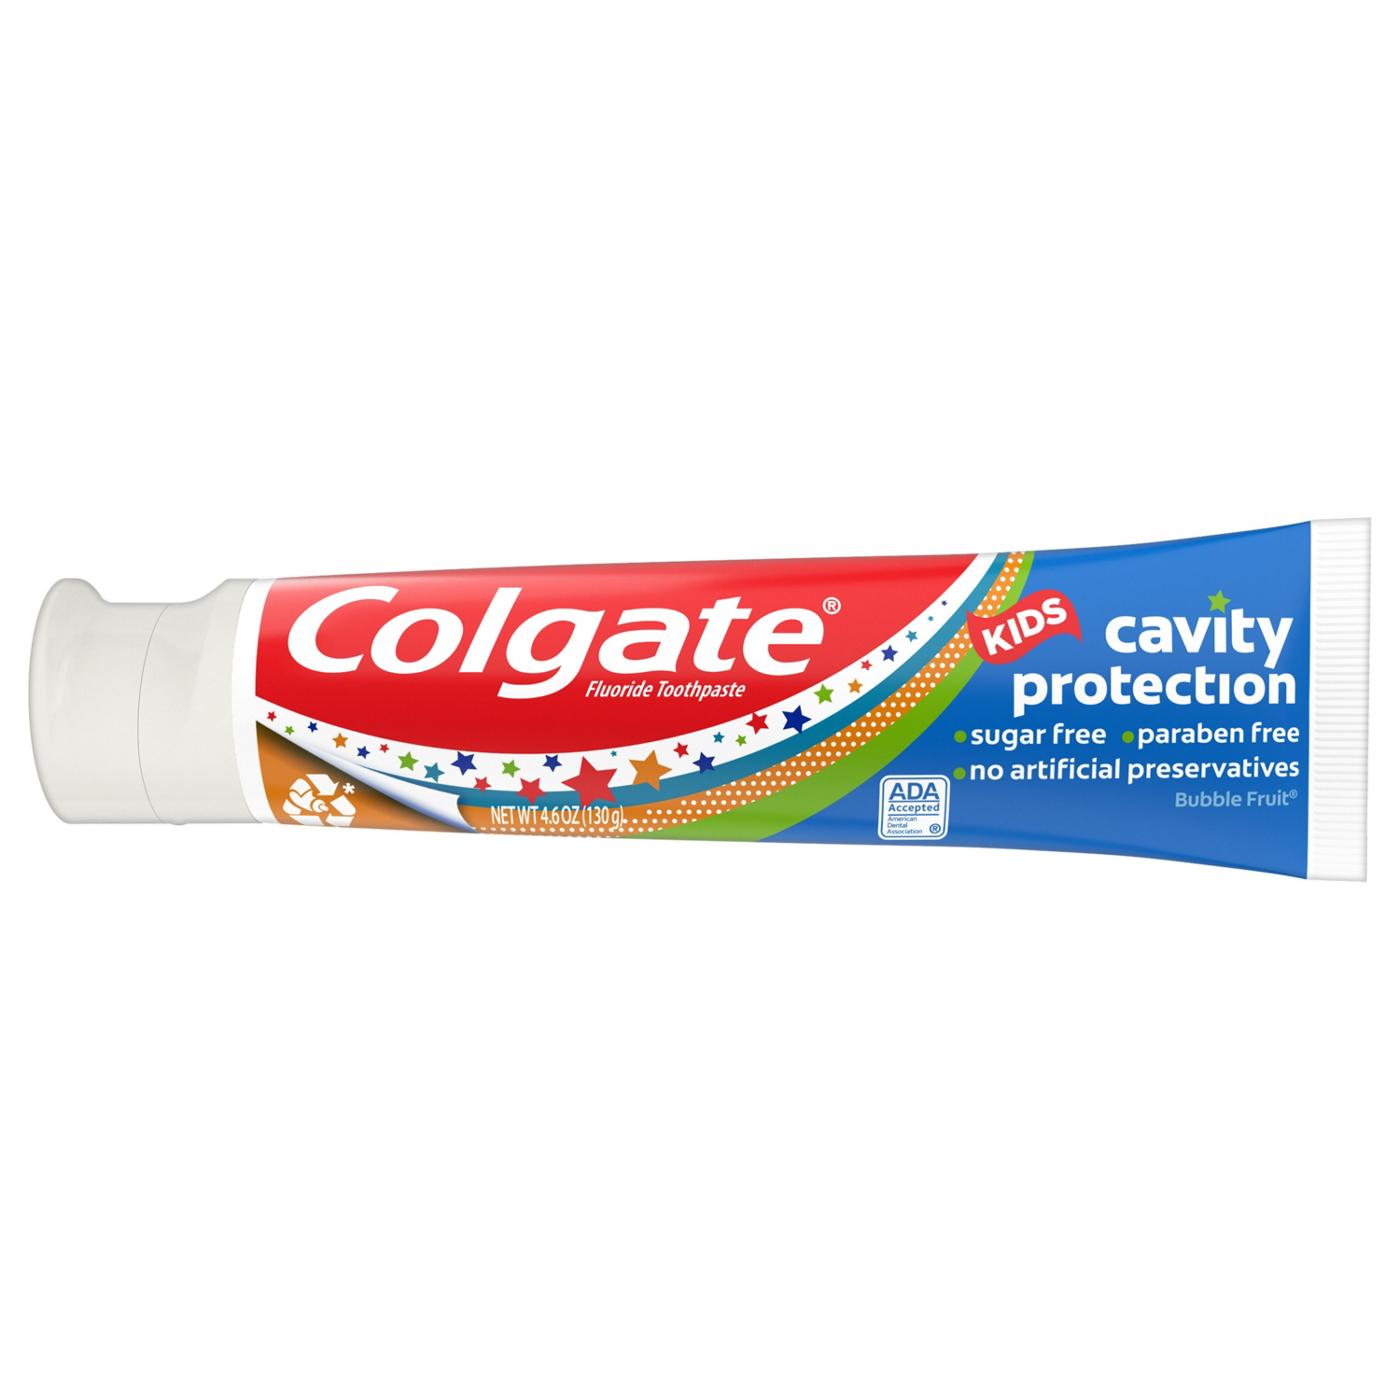 Colgate Kids Cavity Protection Toothpaste - Bubble Fruit; image 3 of 3